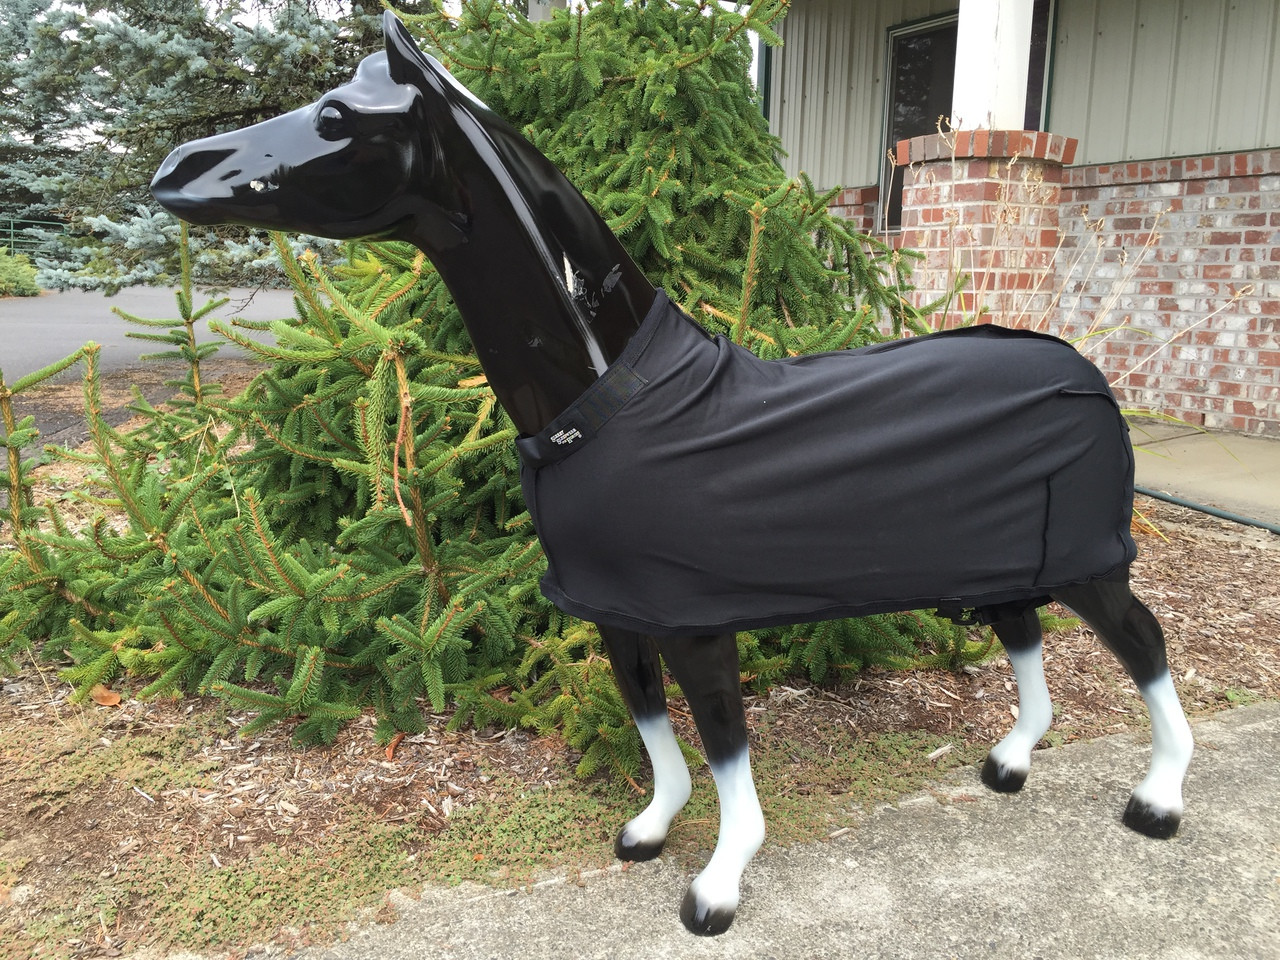 Sleazy Sleepwear Black Horse Body Sheet with Rear Leg Straps and Fleece Lined Adjustable Neck